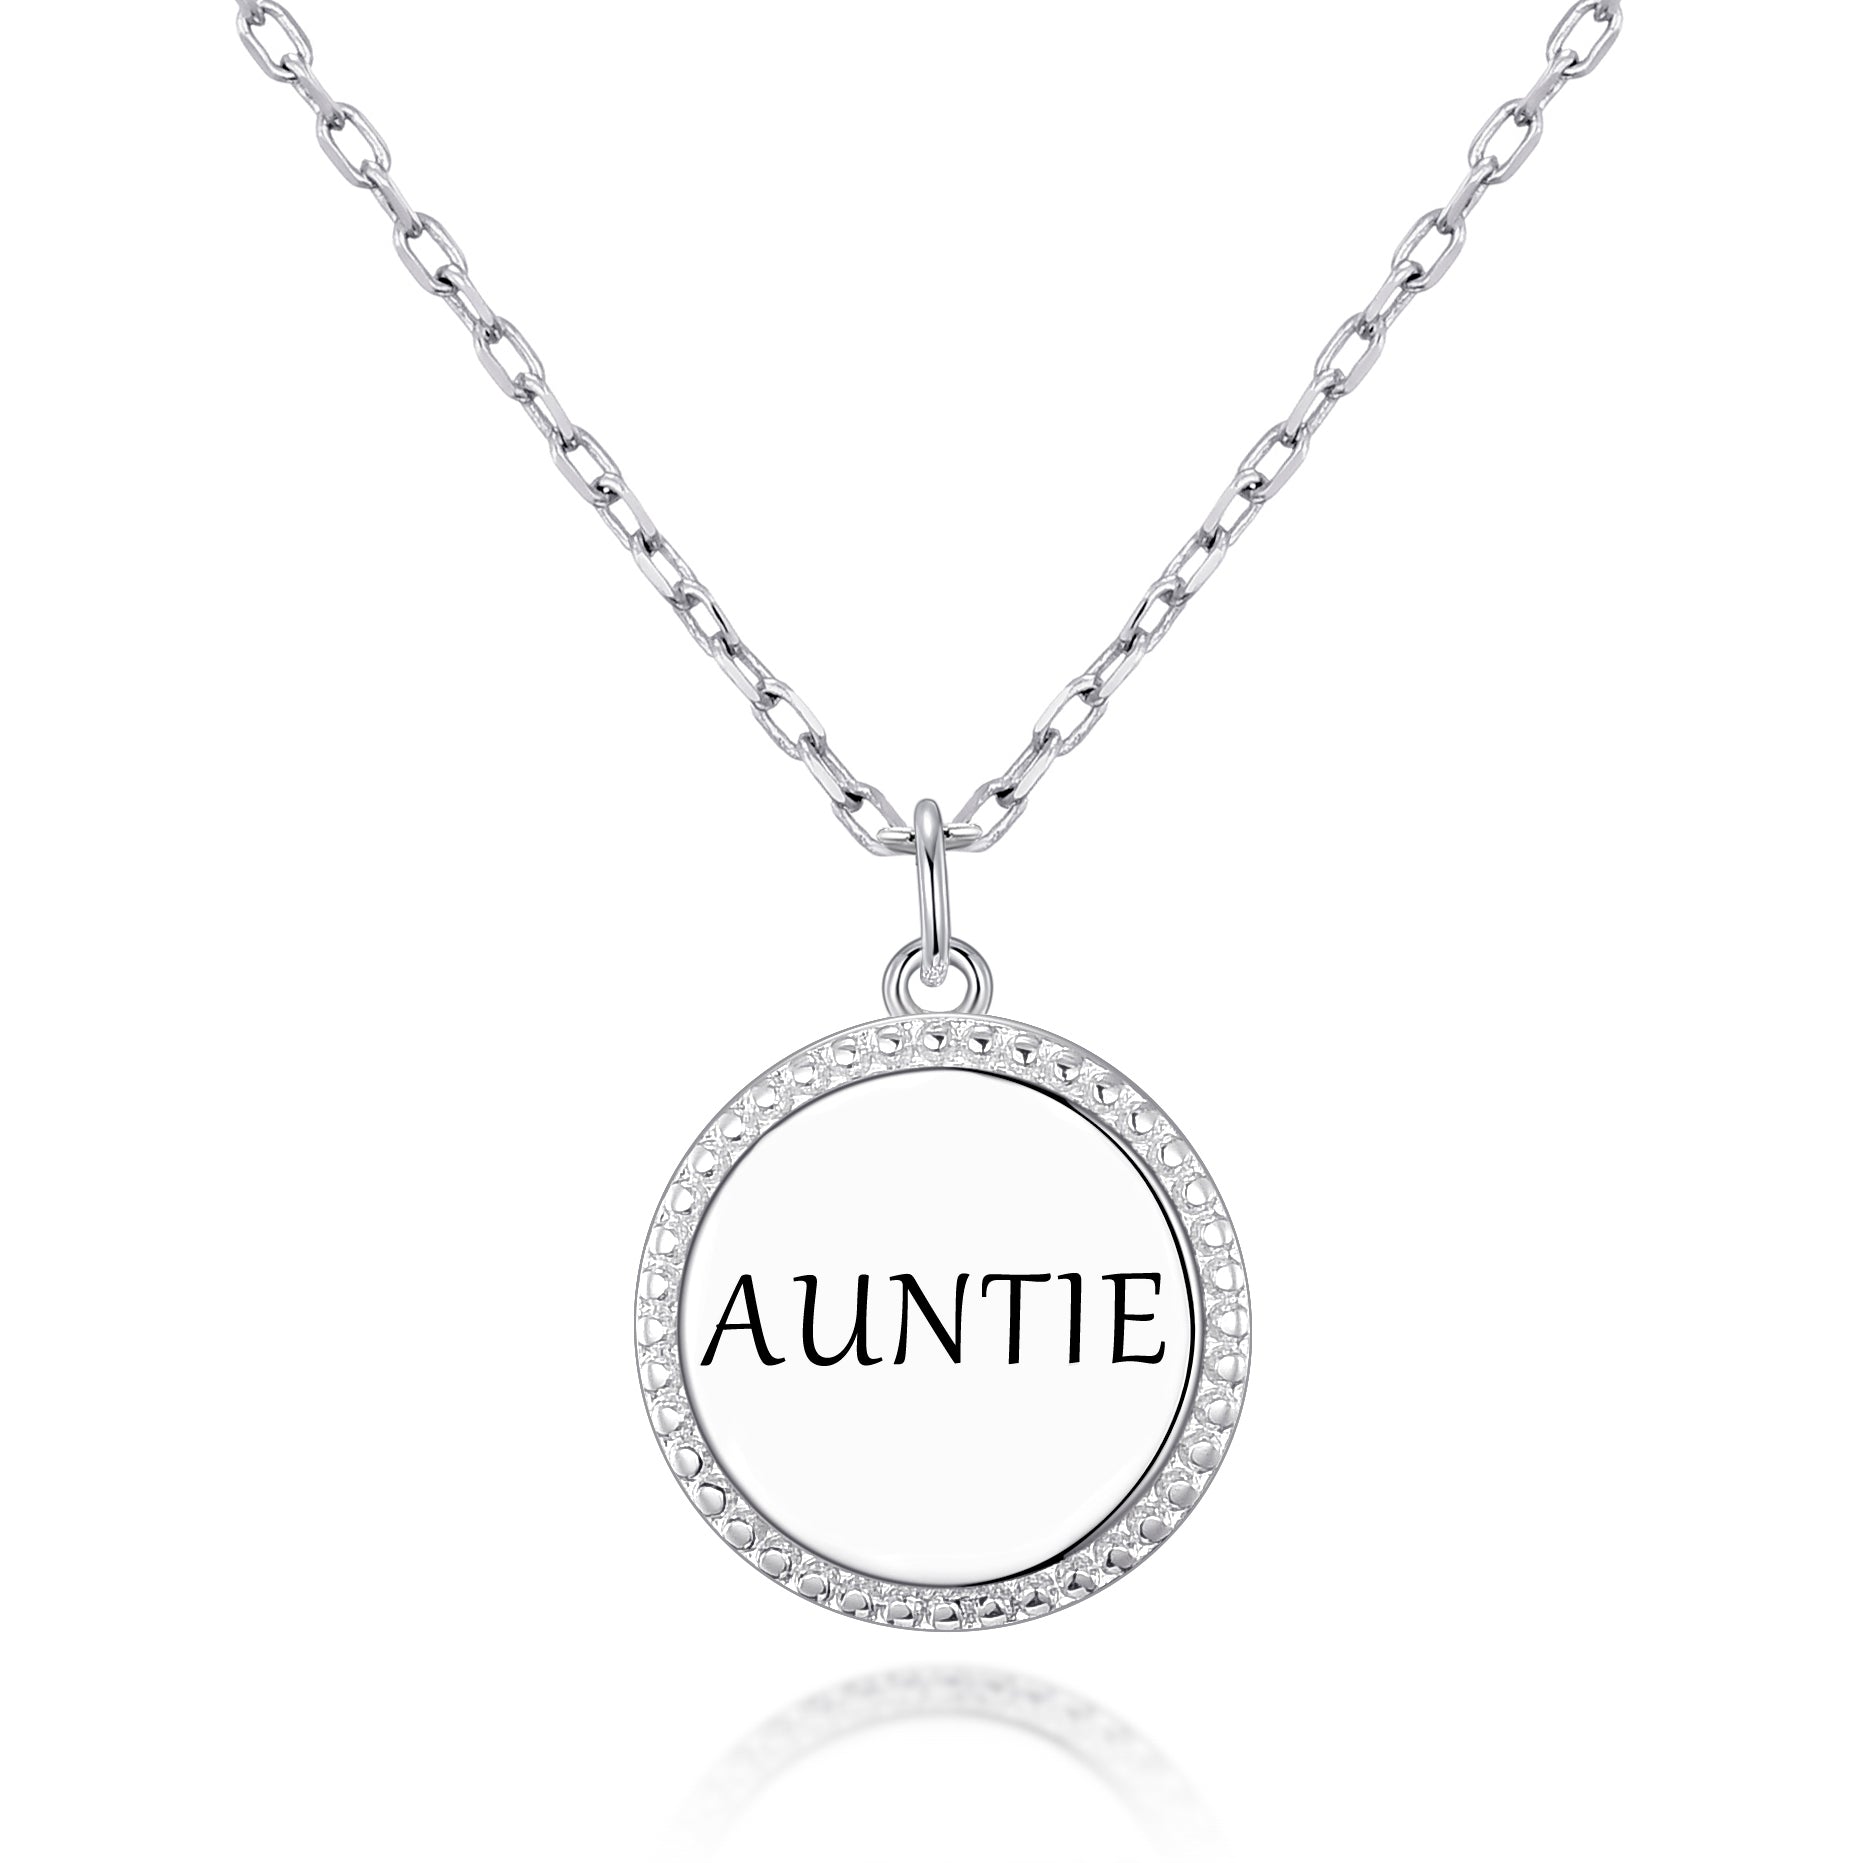 Silver Plated Filigree Disc Auntie Necklace by Philip Jones Jewellery